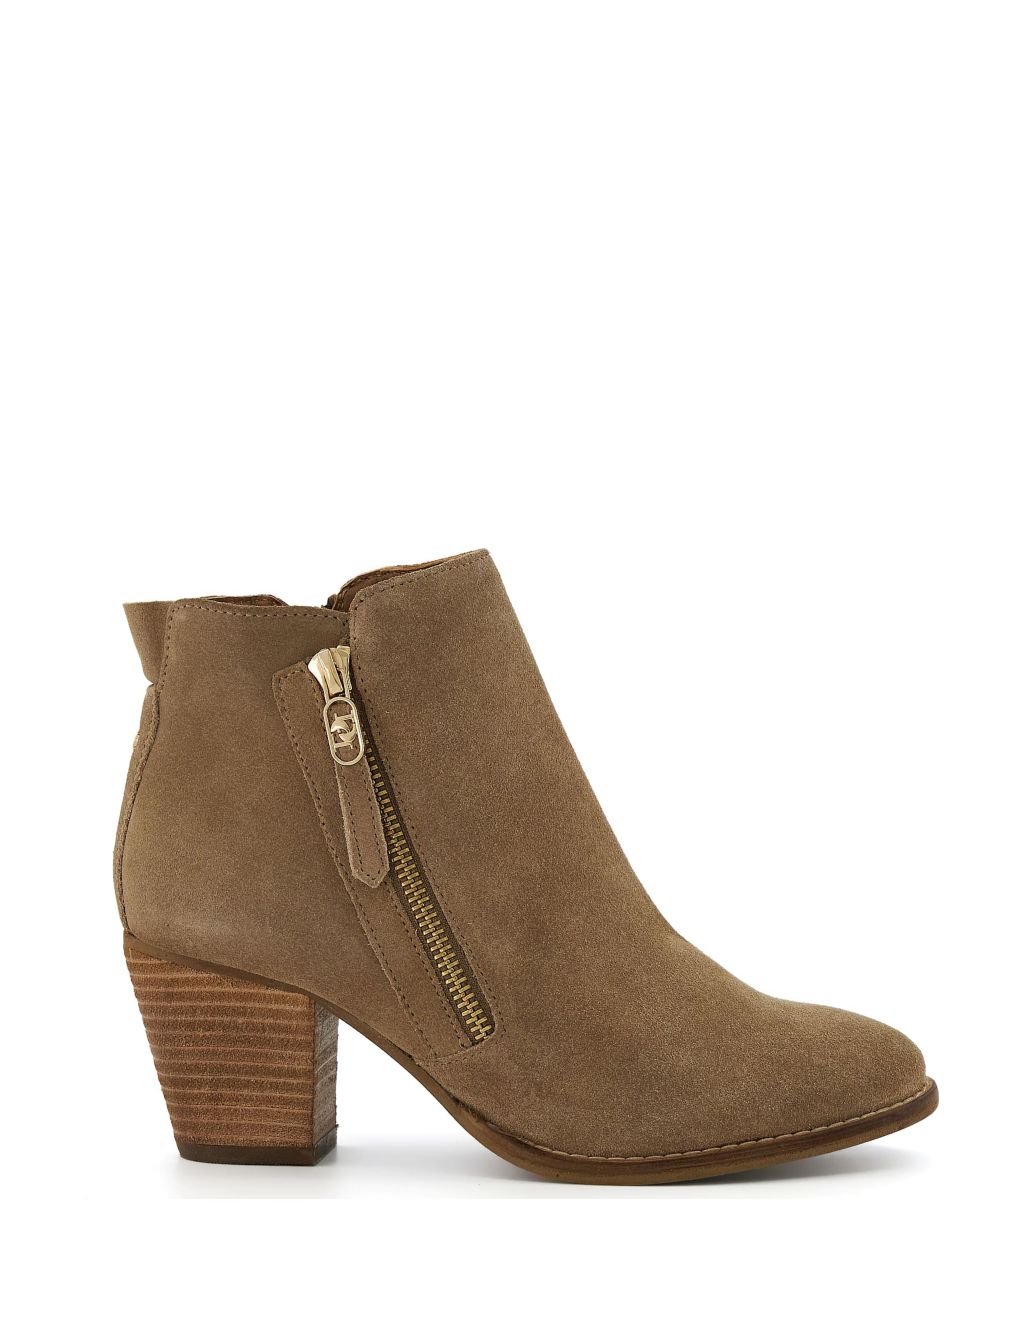 Suede Block Heel Round Toe Ankle Boots image 1